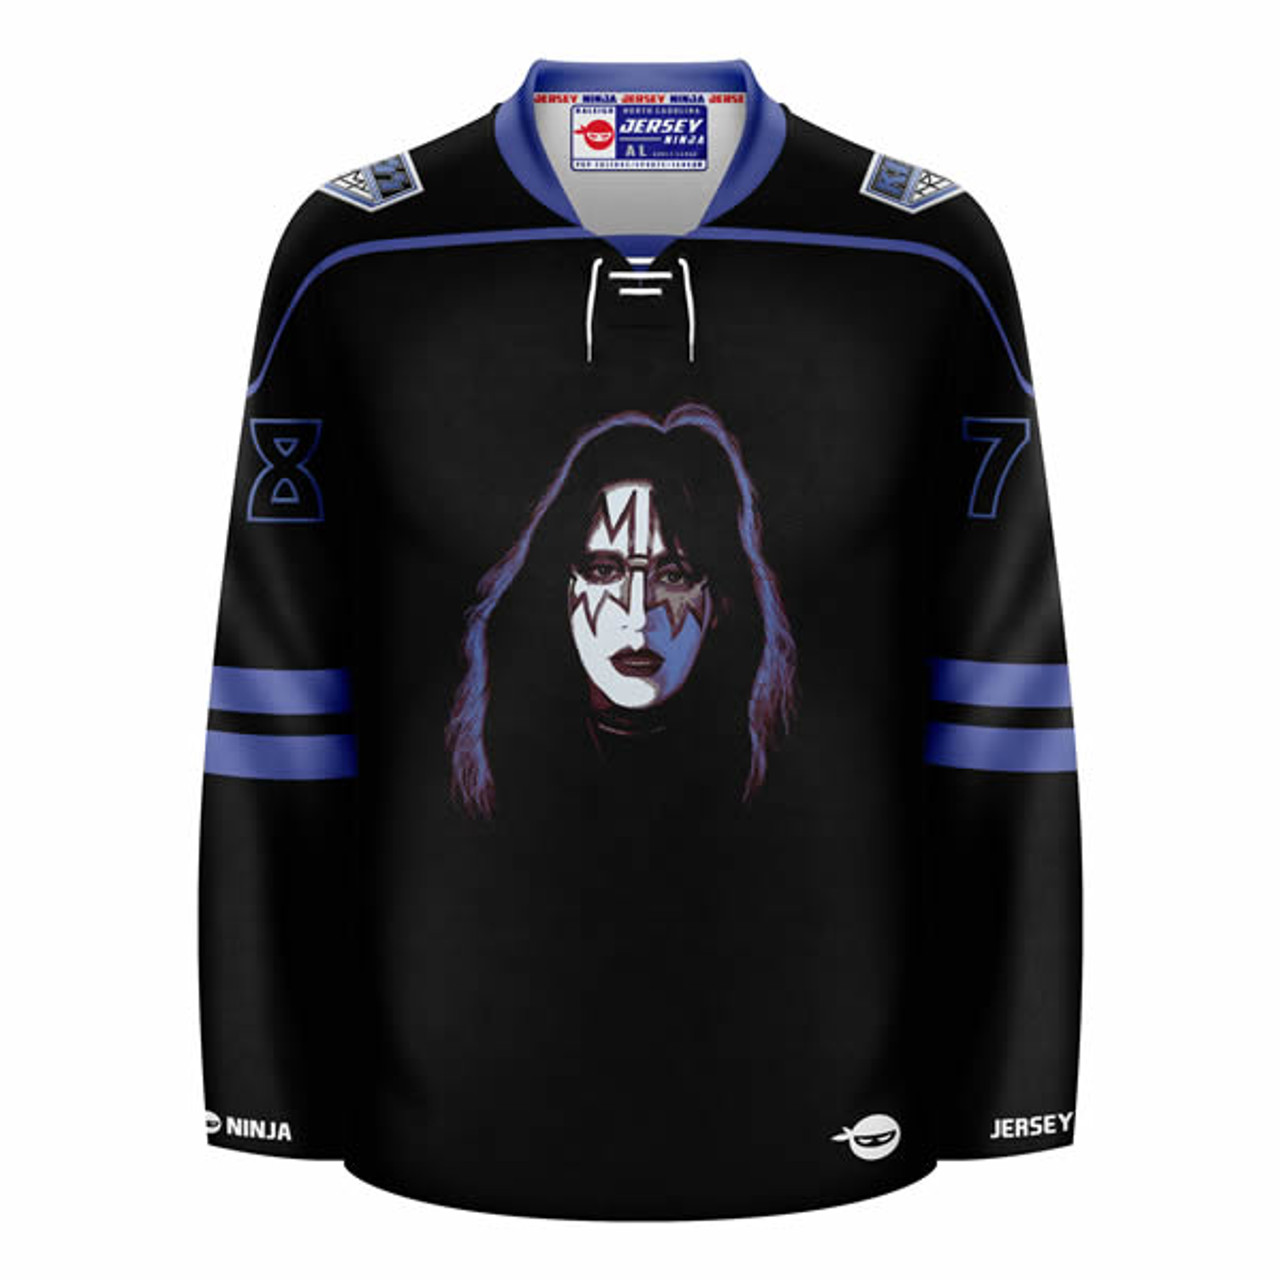 Astronauts hockey jersey I designed for fun :) Would love to hear